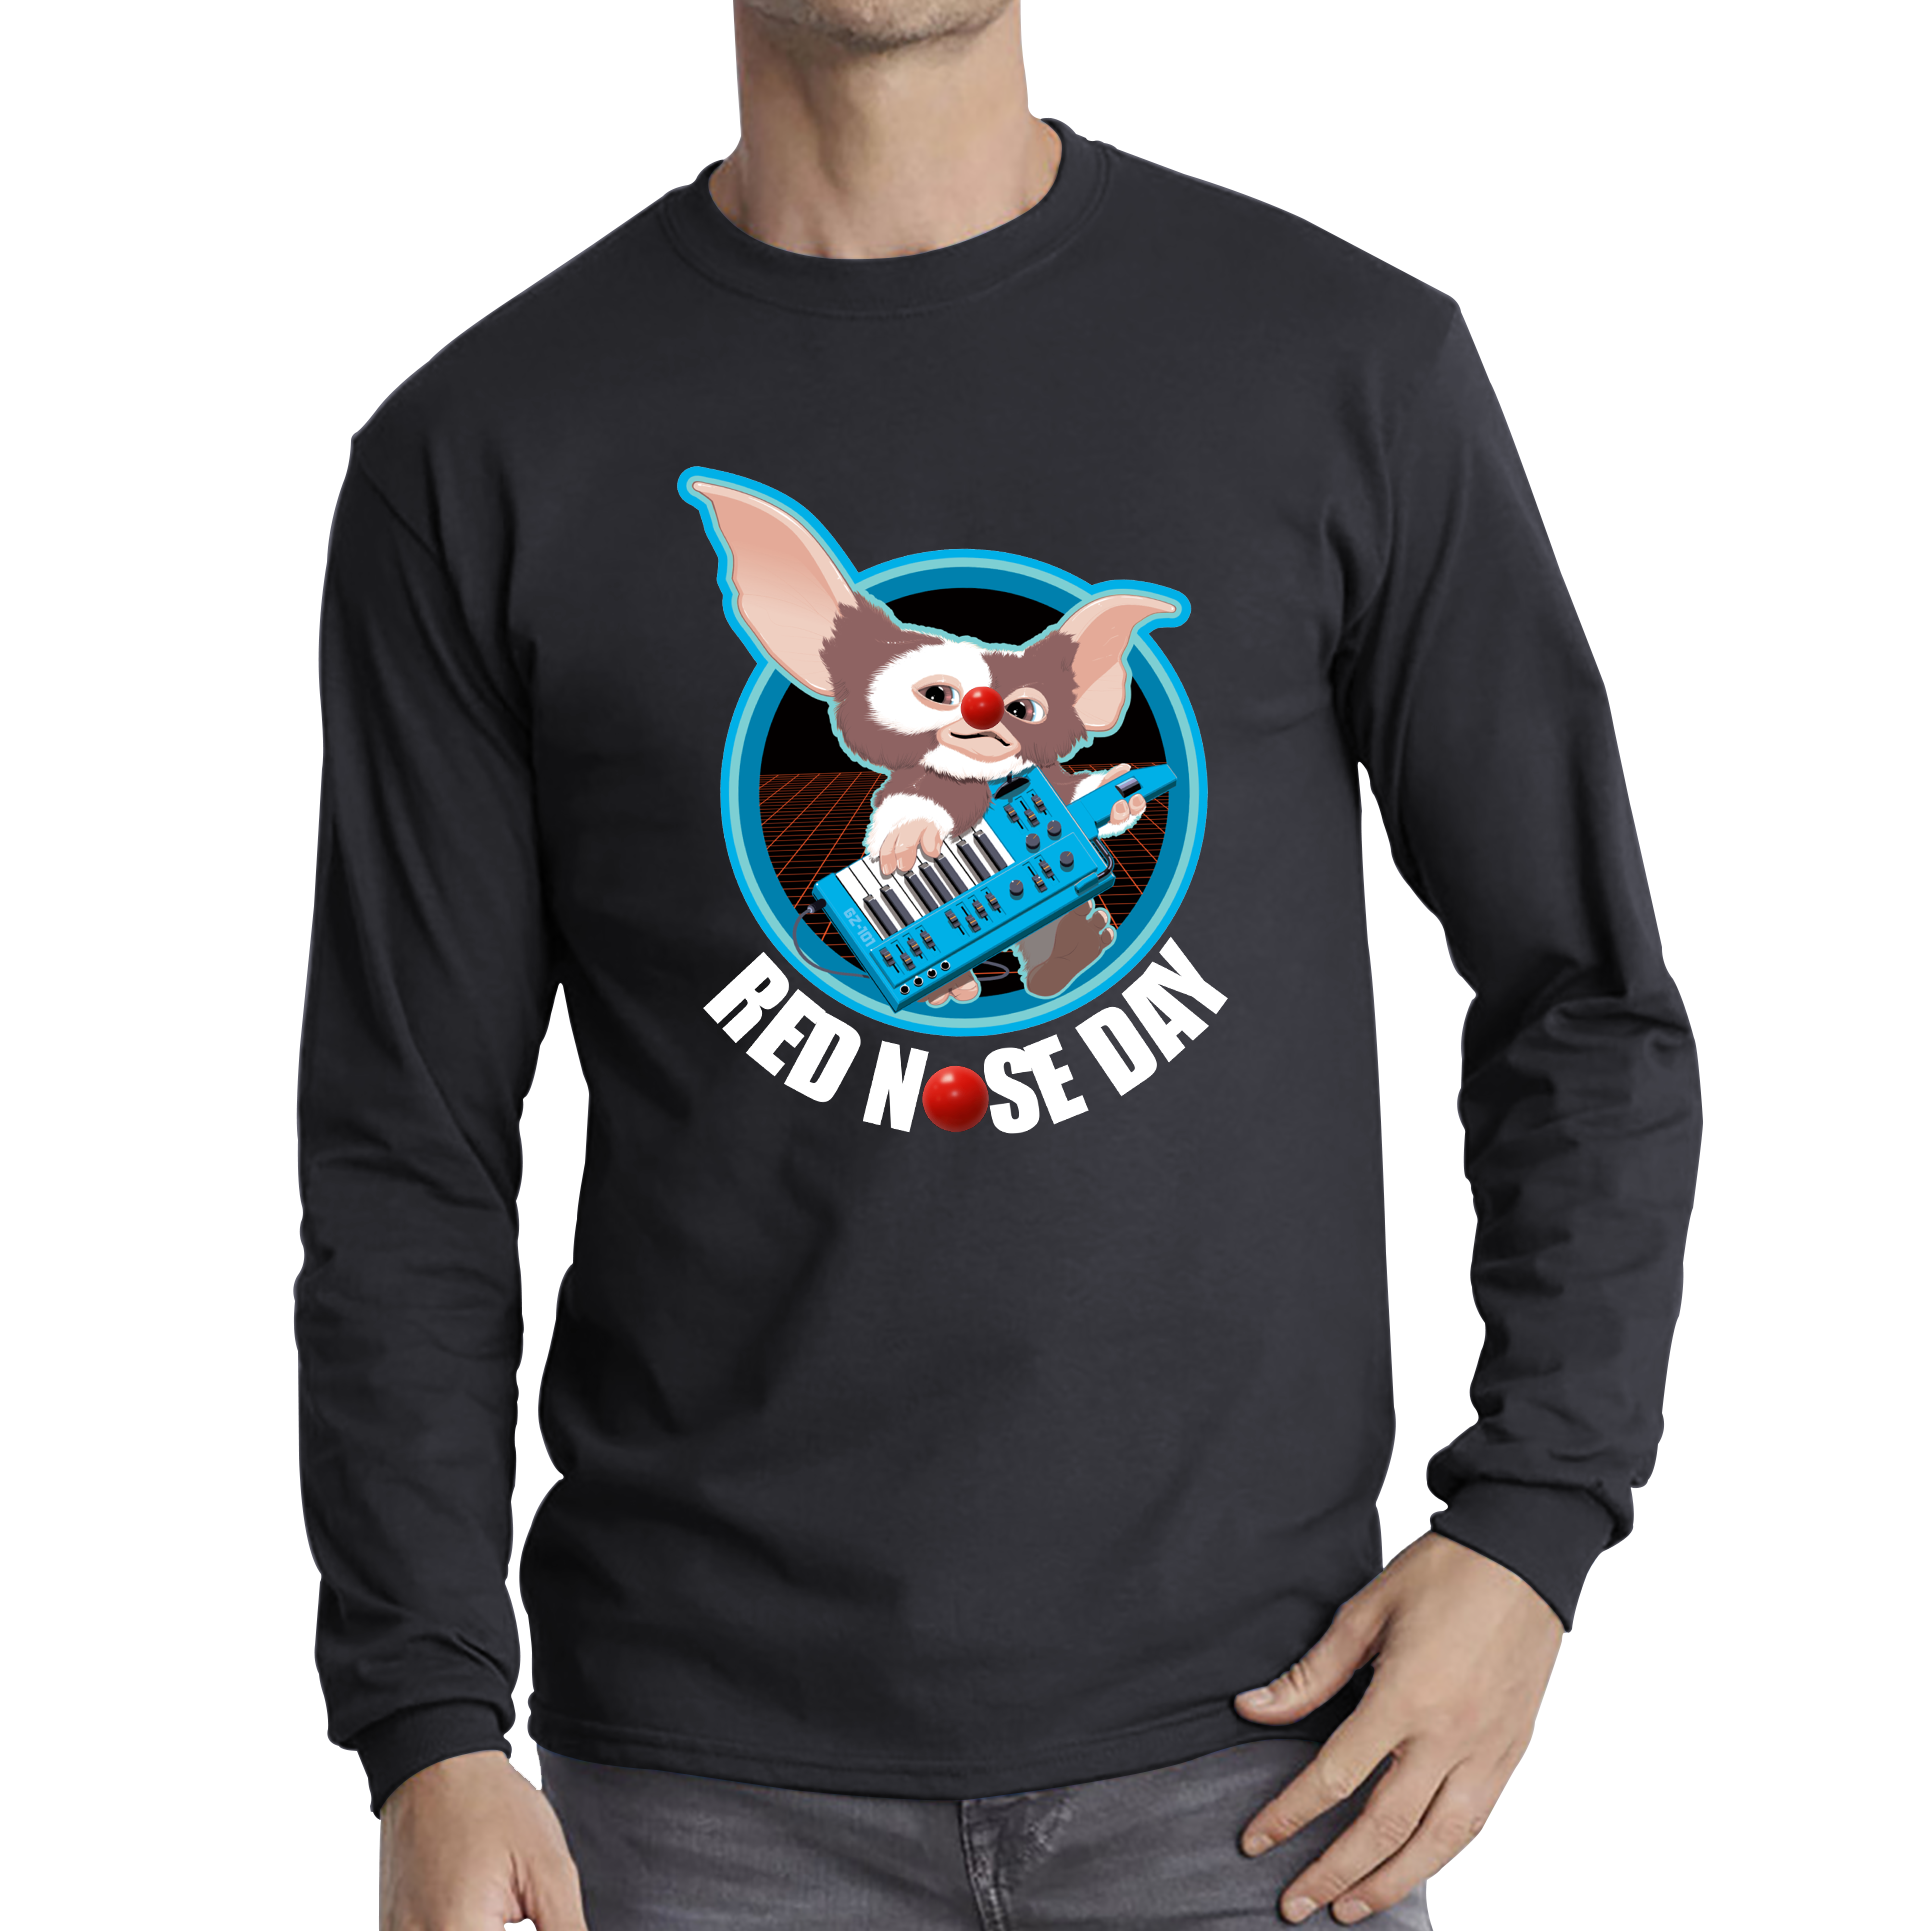 Gremlins Gizmo Piano Red Nose Day Adult Long Sleeve T Shirt. 50% Goes To Charity